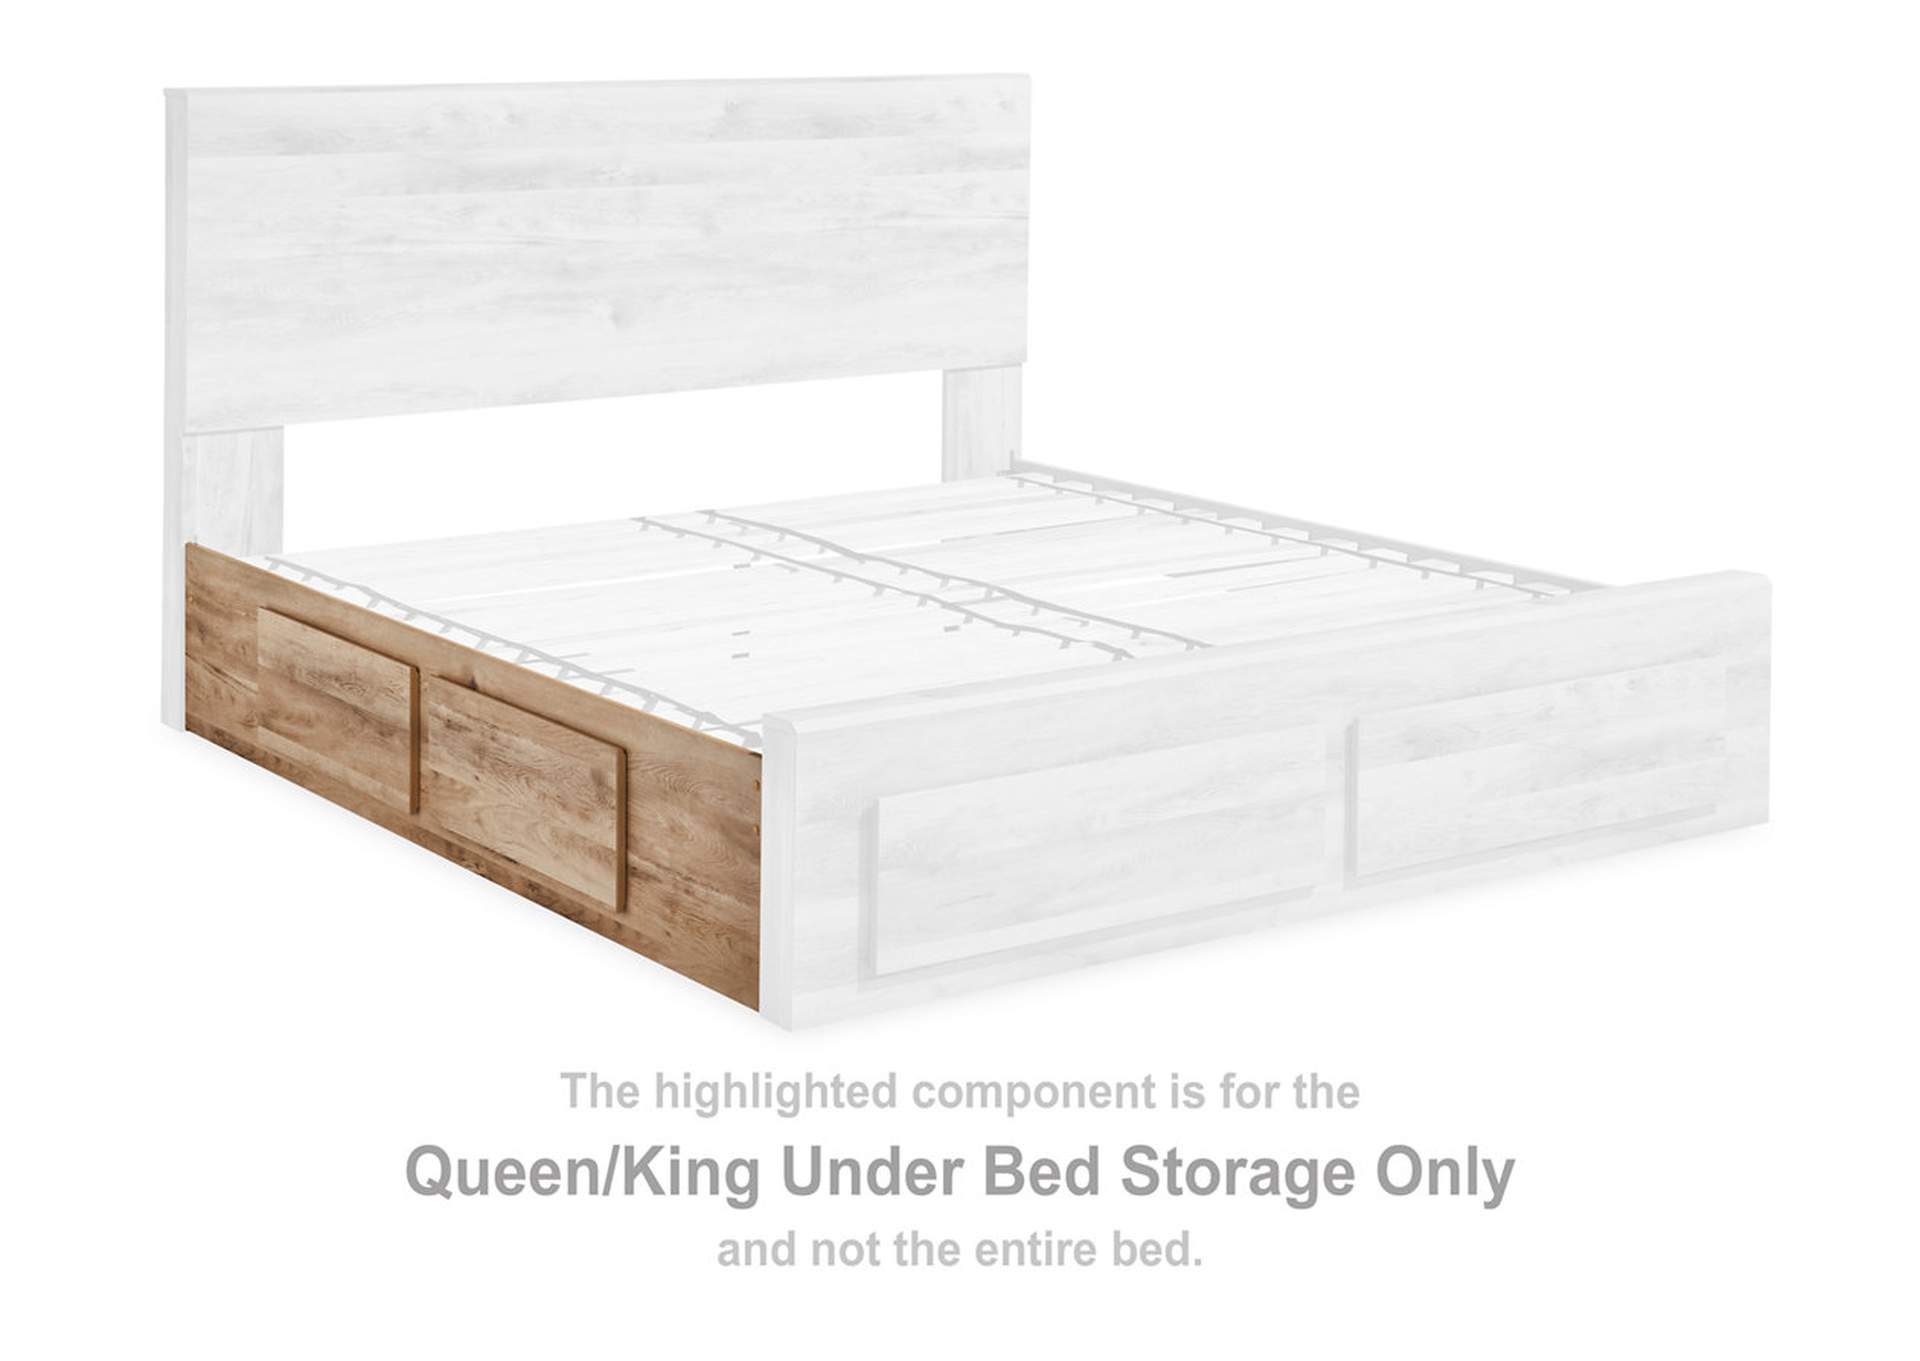 Hyanna King Panel Storage Bed with 2 Side Storage, Dresser and Mirror,Signature Design By Ashley